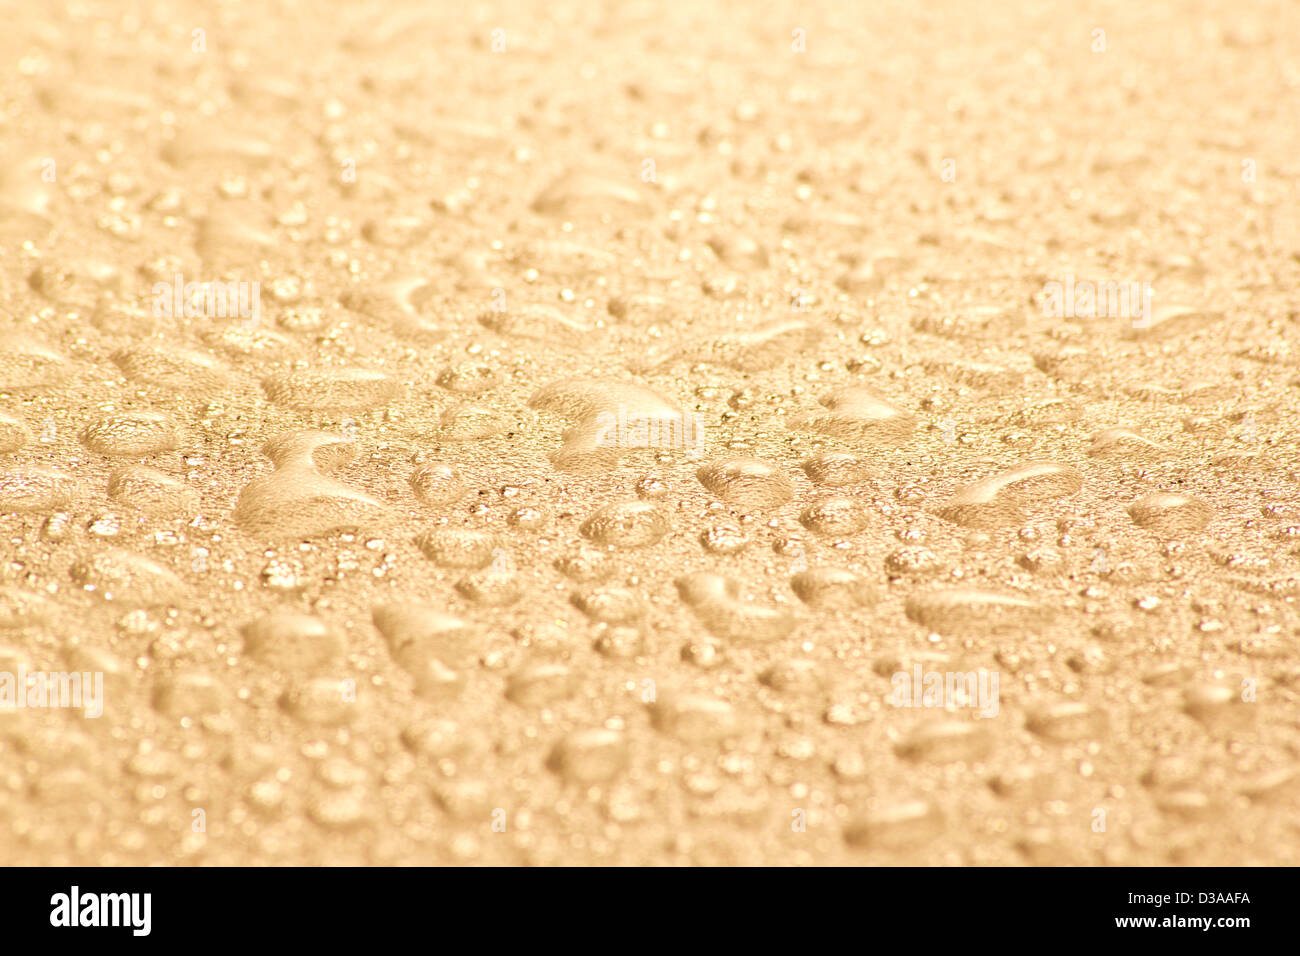 Abstract backgrounds drops of water. Stock Photo